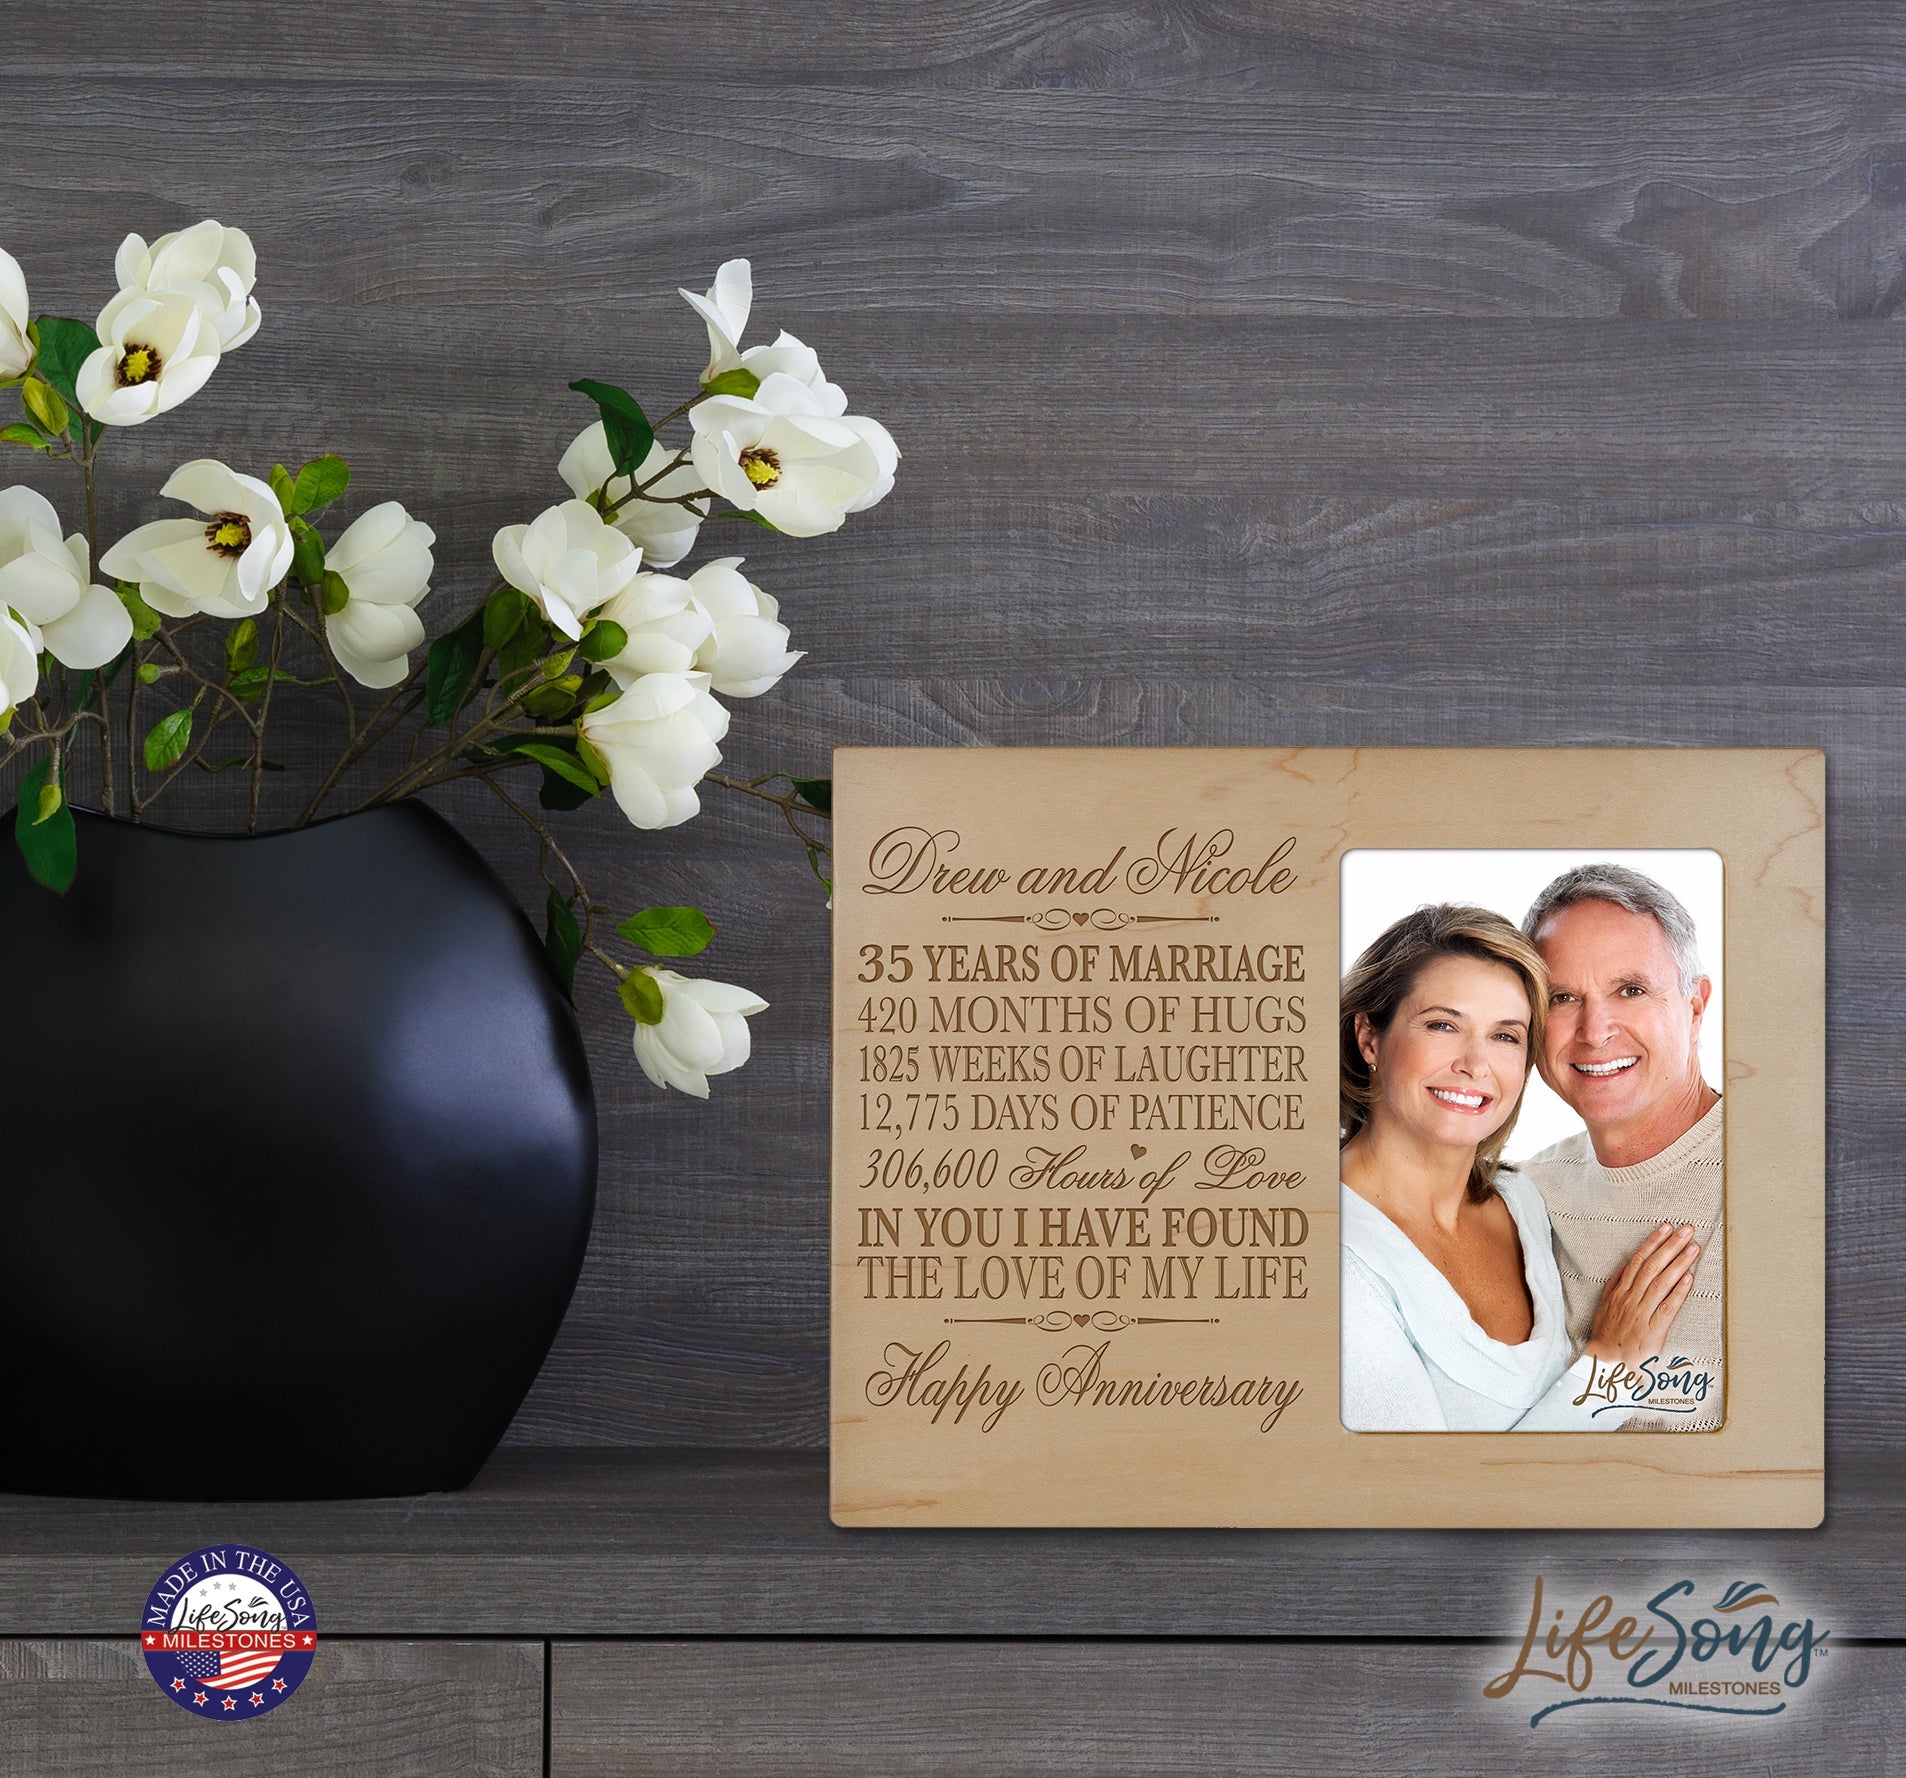 Personalized Couples 35th Wedding Anniversary Picture Frame Decorations - In You I Have Found - LifeSong Milestones